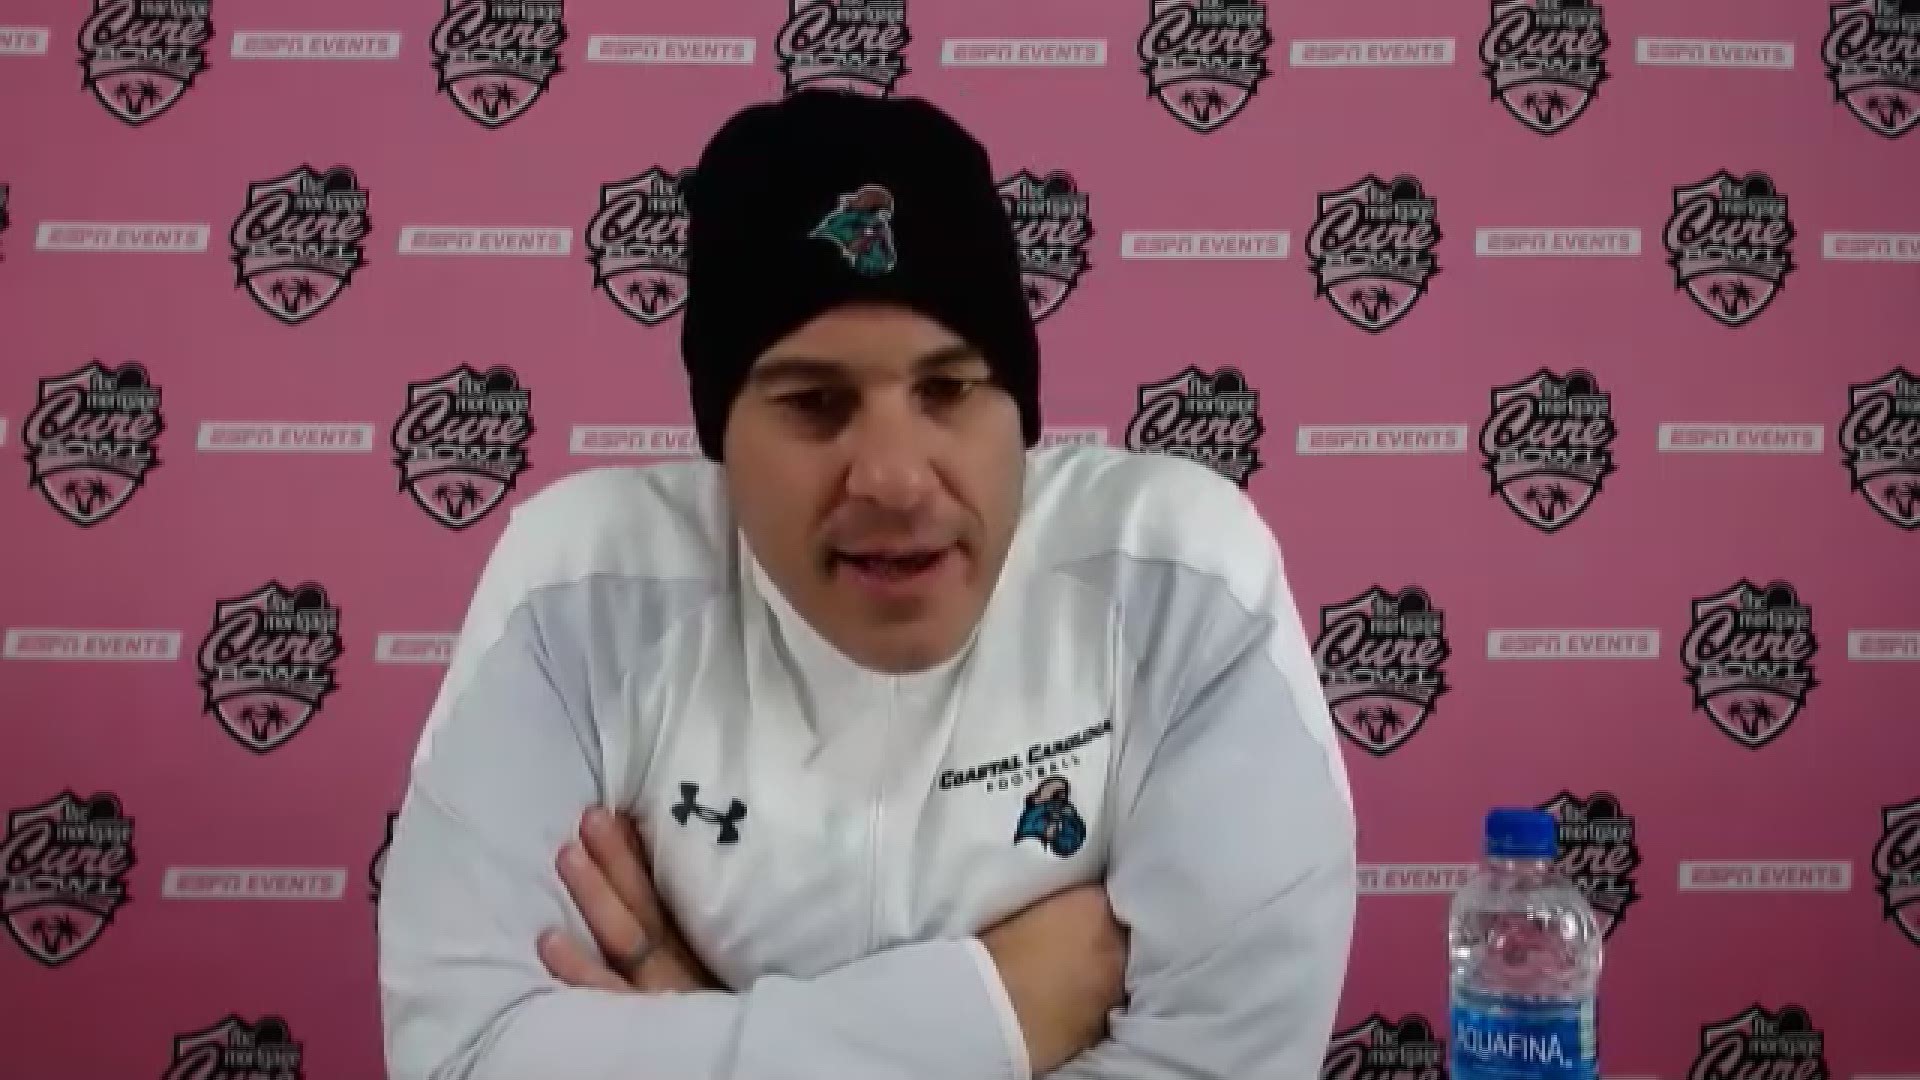 Coastal Carolina head football coach Jamey Chadwell speaks to the media after his team's overtime loss to Liberty in the Cure Bowl.